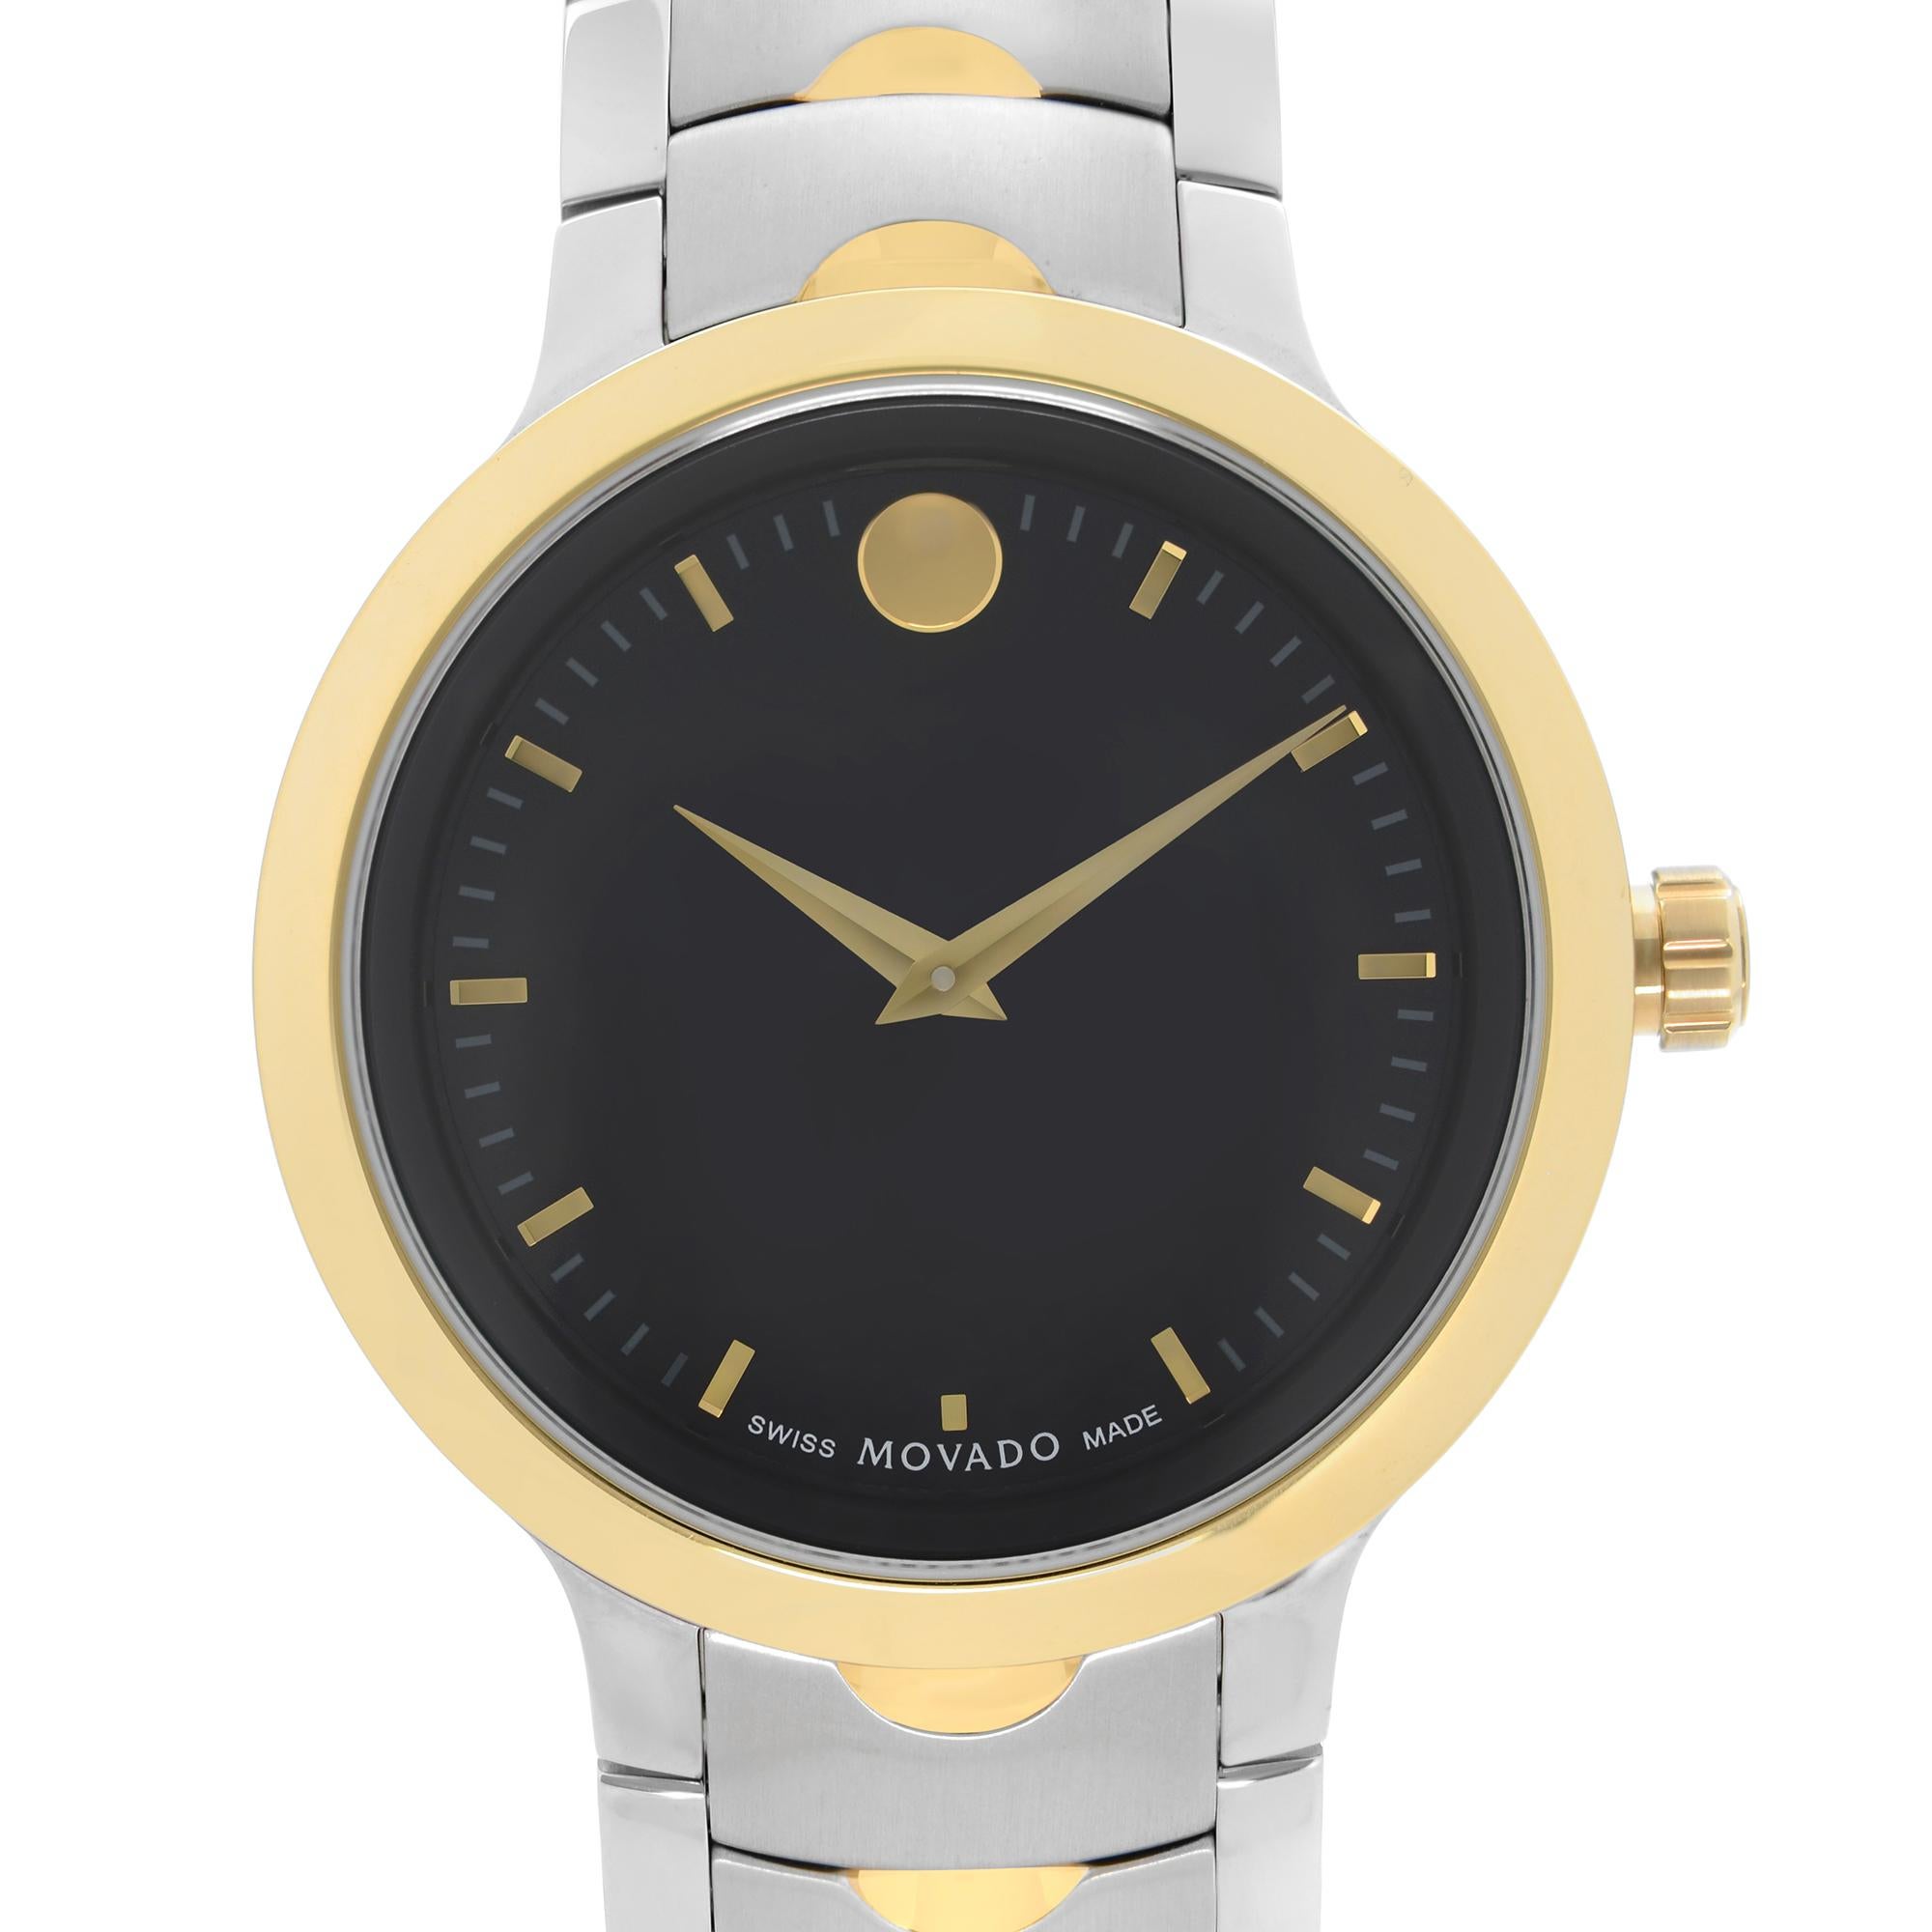 Store Display Model Movado Luno Quartz Watch 0607043. Timepiece Has Minor Blemishes on the Bezel Due to Store Handling. Original Box and Papers are Included. Covered by 1-year Chronostore Warranty. 
Details:
MSRP 1095.00
Brand Movado
Department